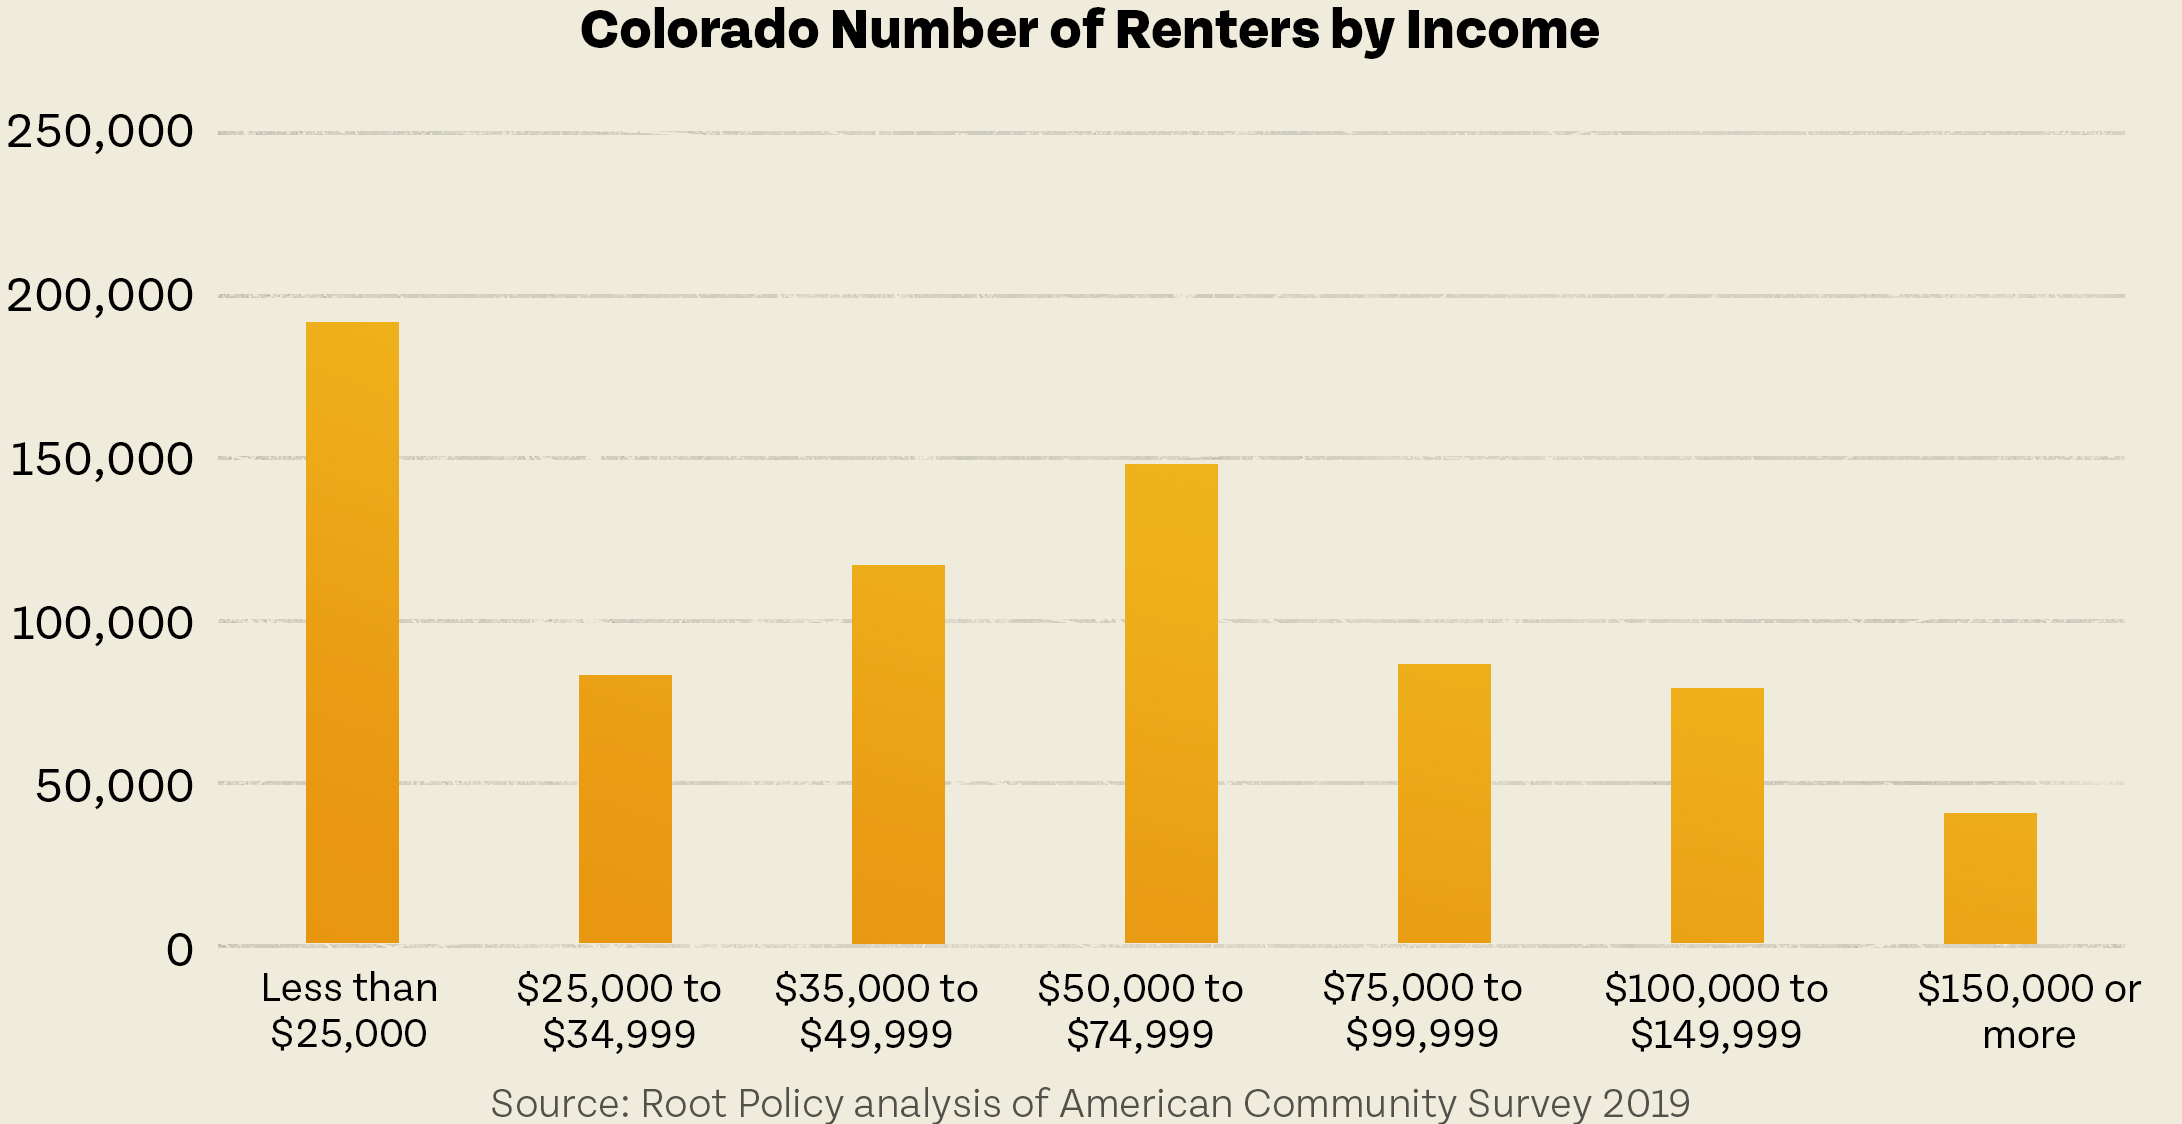 Bar chart showing the distribution of renters in Colorado by income brackets, with the largest number of renters earning less than $25,000, reflecting trends in housing market prices.